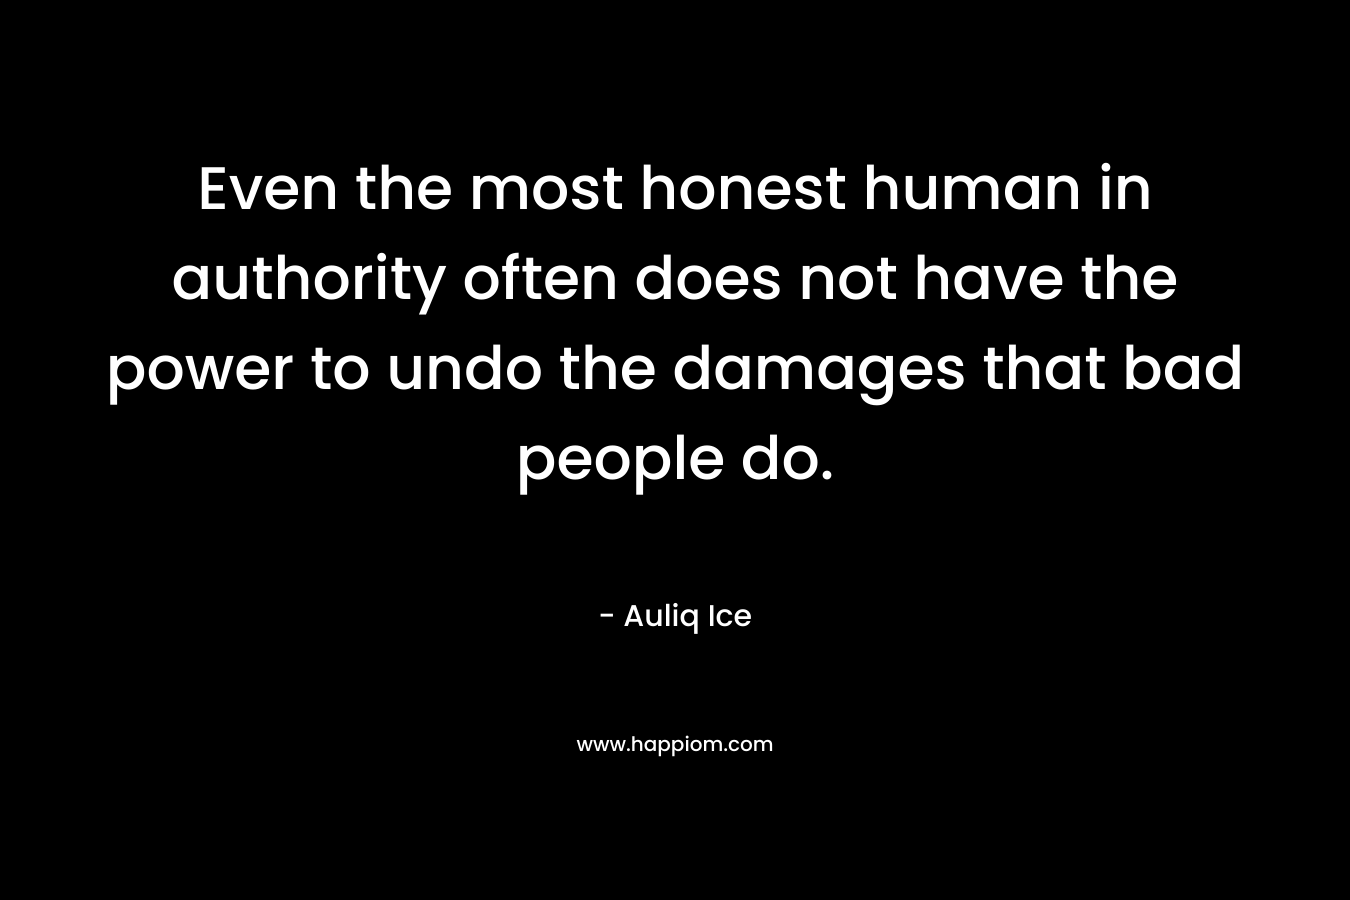 Even the most honest human in authority often does not have the power to undo the damages that bad people do. – Auliq Ice